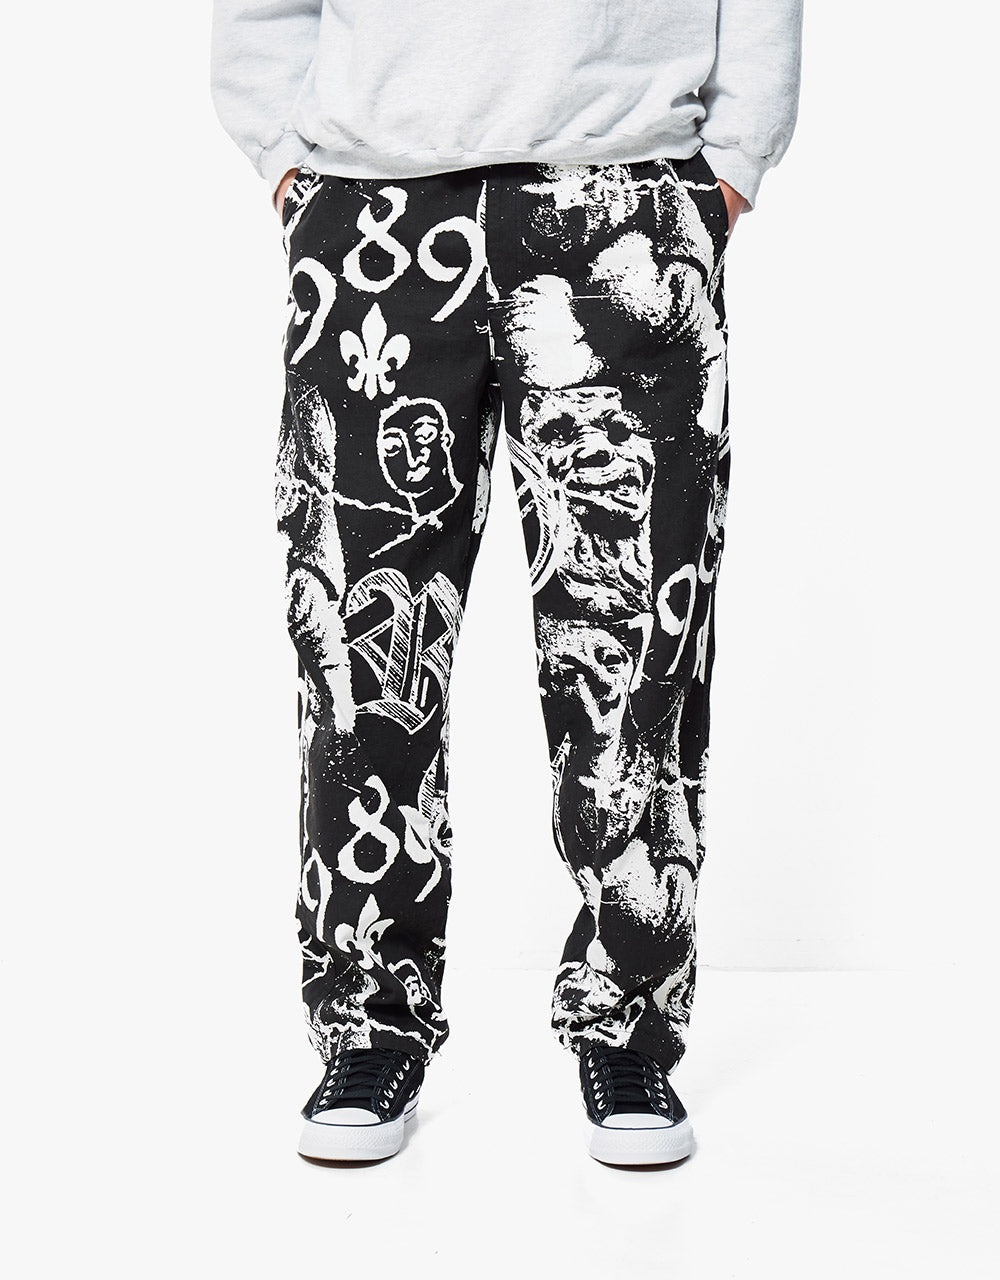 Route One Organic Baggy Pants - Medievil Black/White